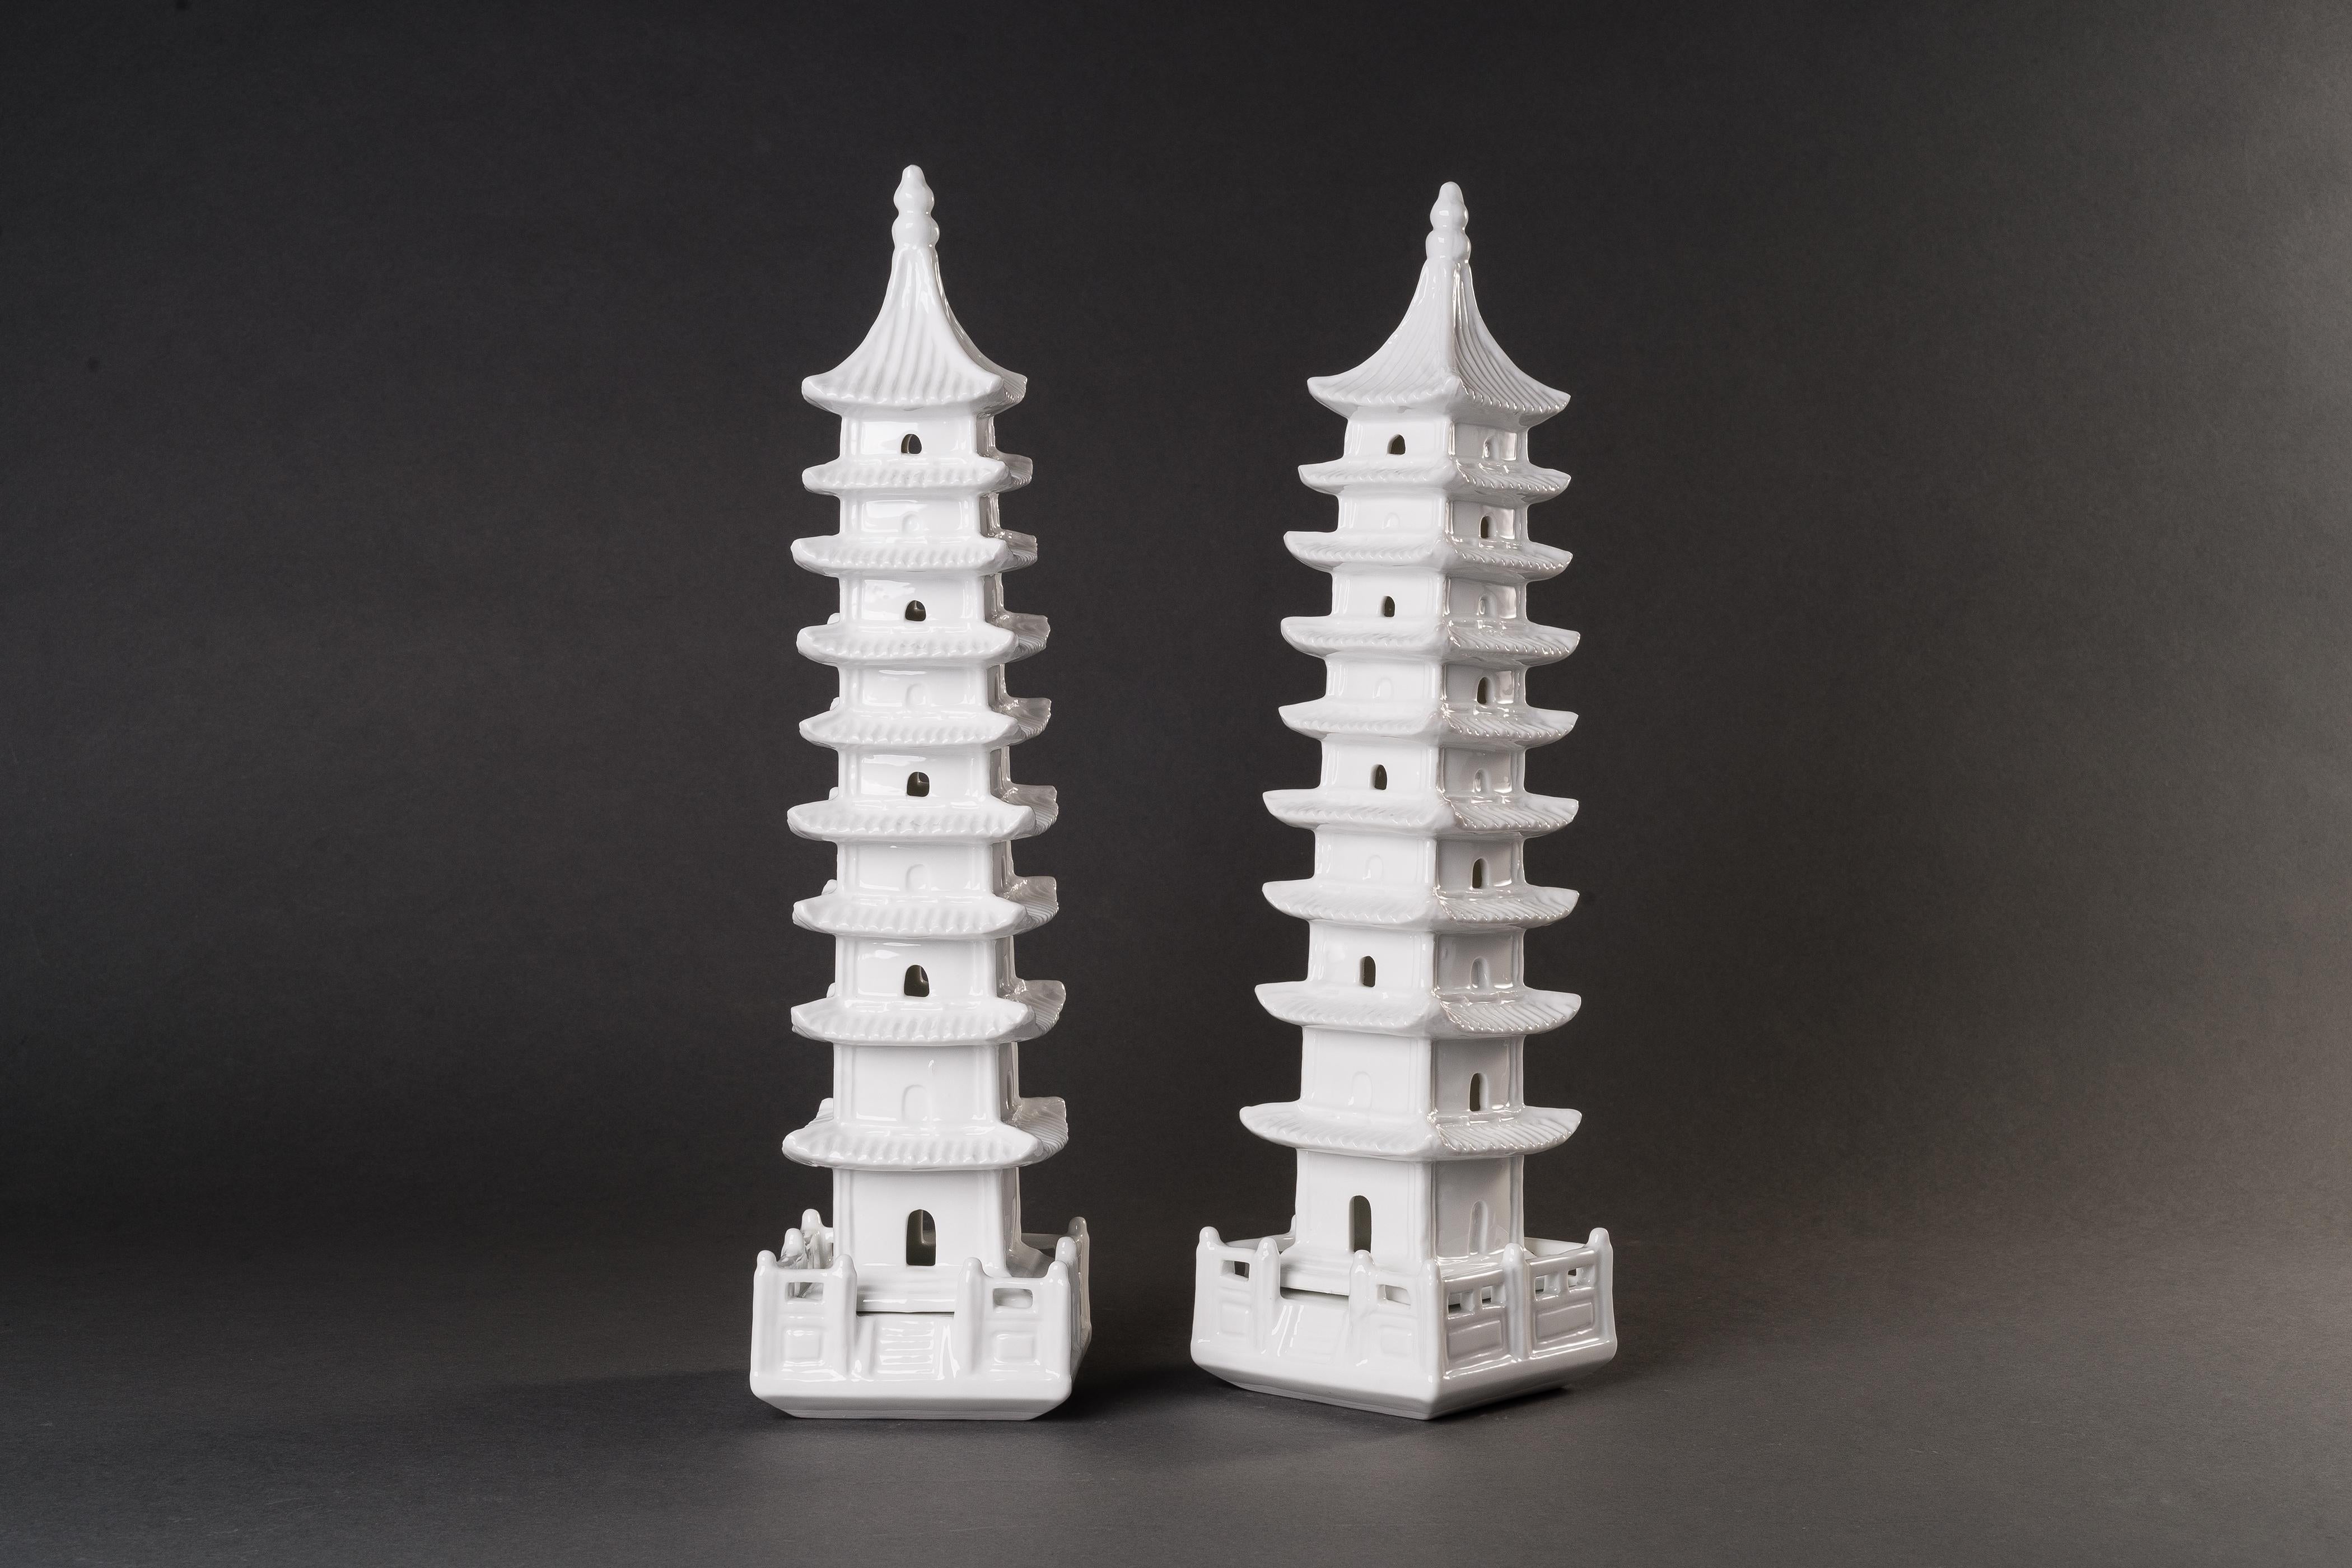 Hand-Crafted Blanc de Chine Pagodas, Chinoiserie White Porcelain Object of Art, Pair